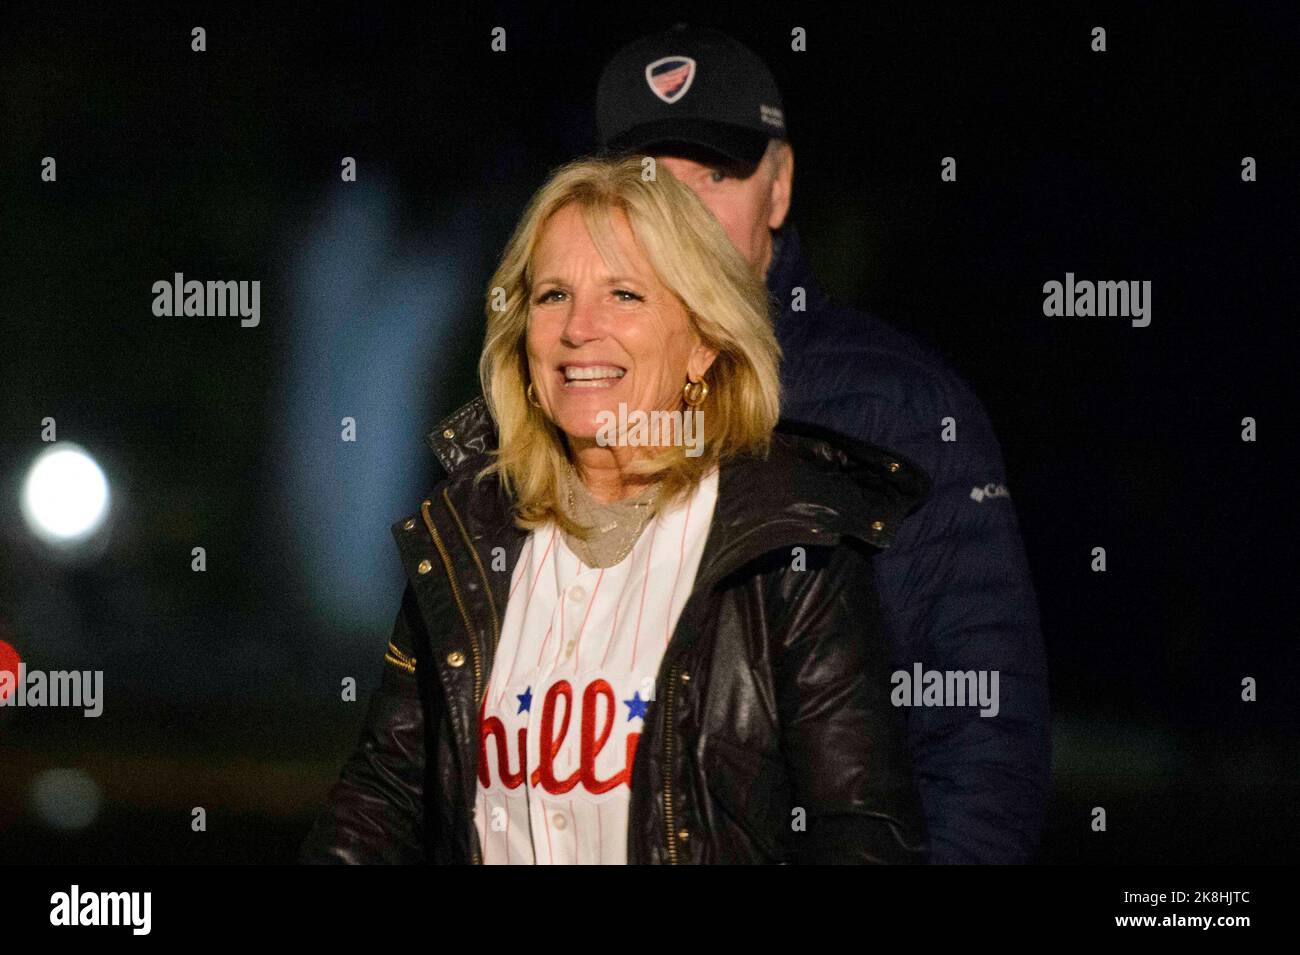 First Lady Jill Biden, wearing a Philadelphia Phillies jersey, smiles at  the press after departing Marine One at the White House in Washington, DC  on Sunday, October 23, 2022. The Phillies advanced